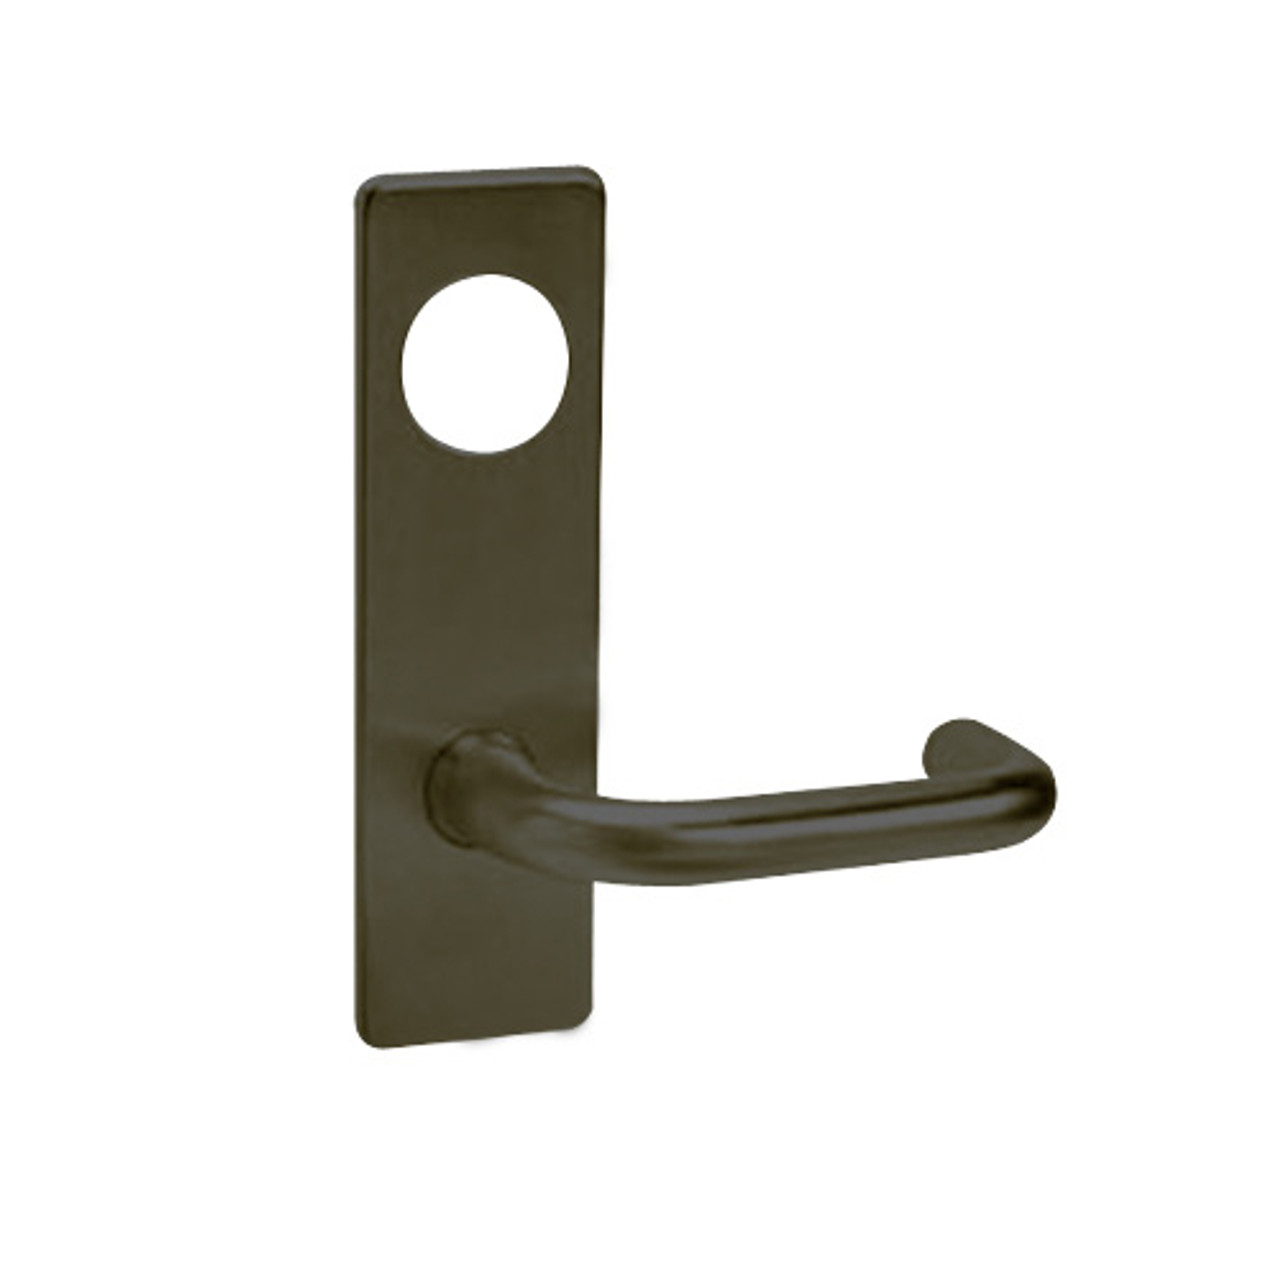 ML2058-LWM-613-M31 Corbin Russwin ML2000 Series Mortise Entrance Holdback Trim Pack with Lustra Lever in Oil Rubbed Bronze